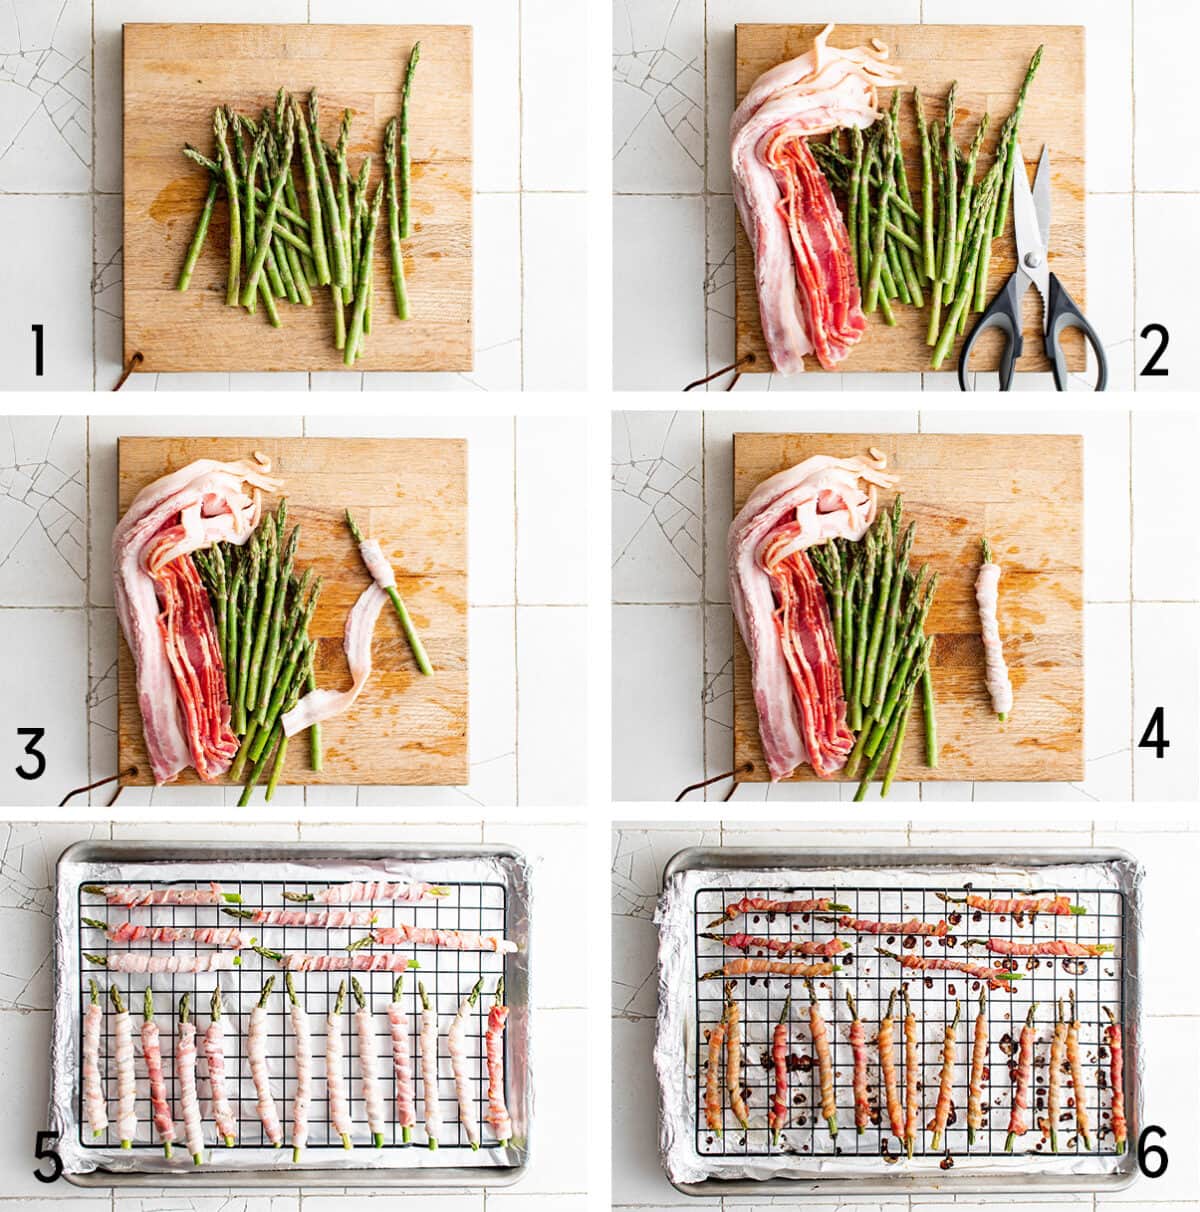 Collage of images showing how to make bacon wrapped asparagus. 